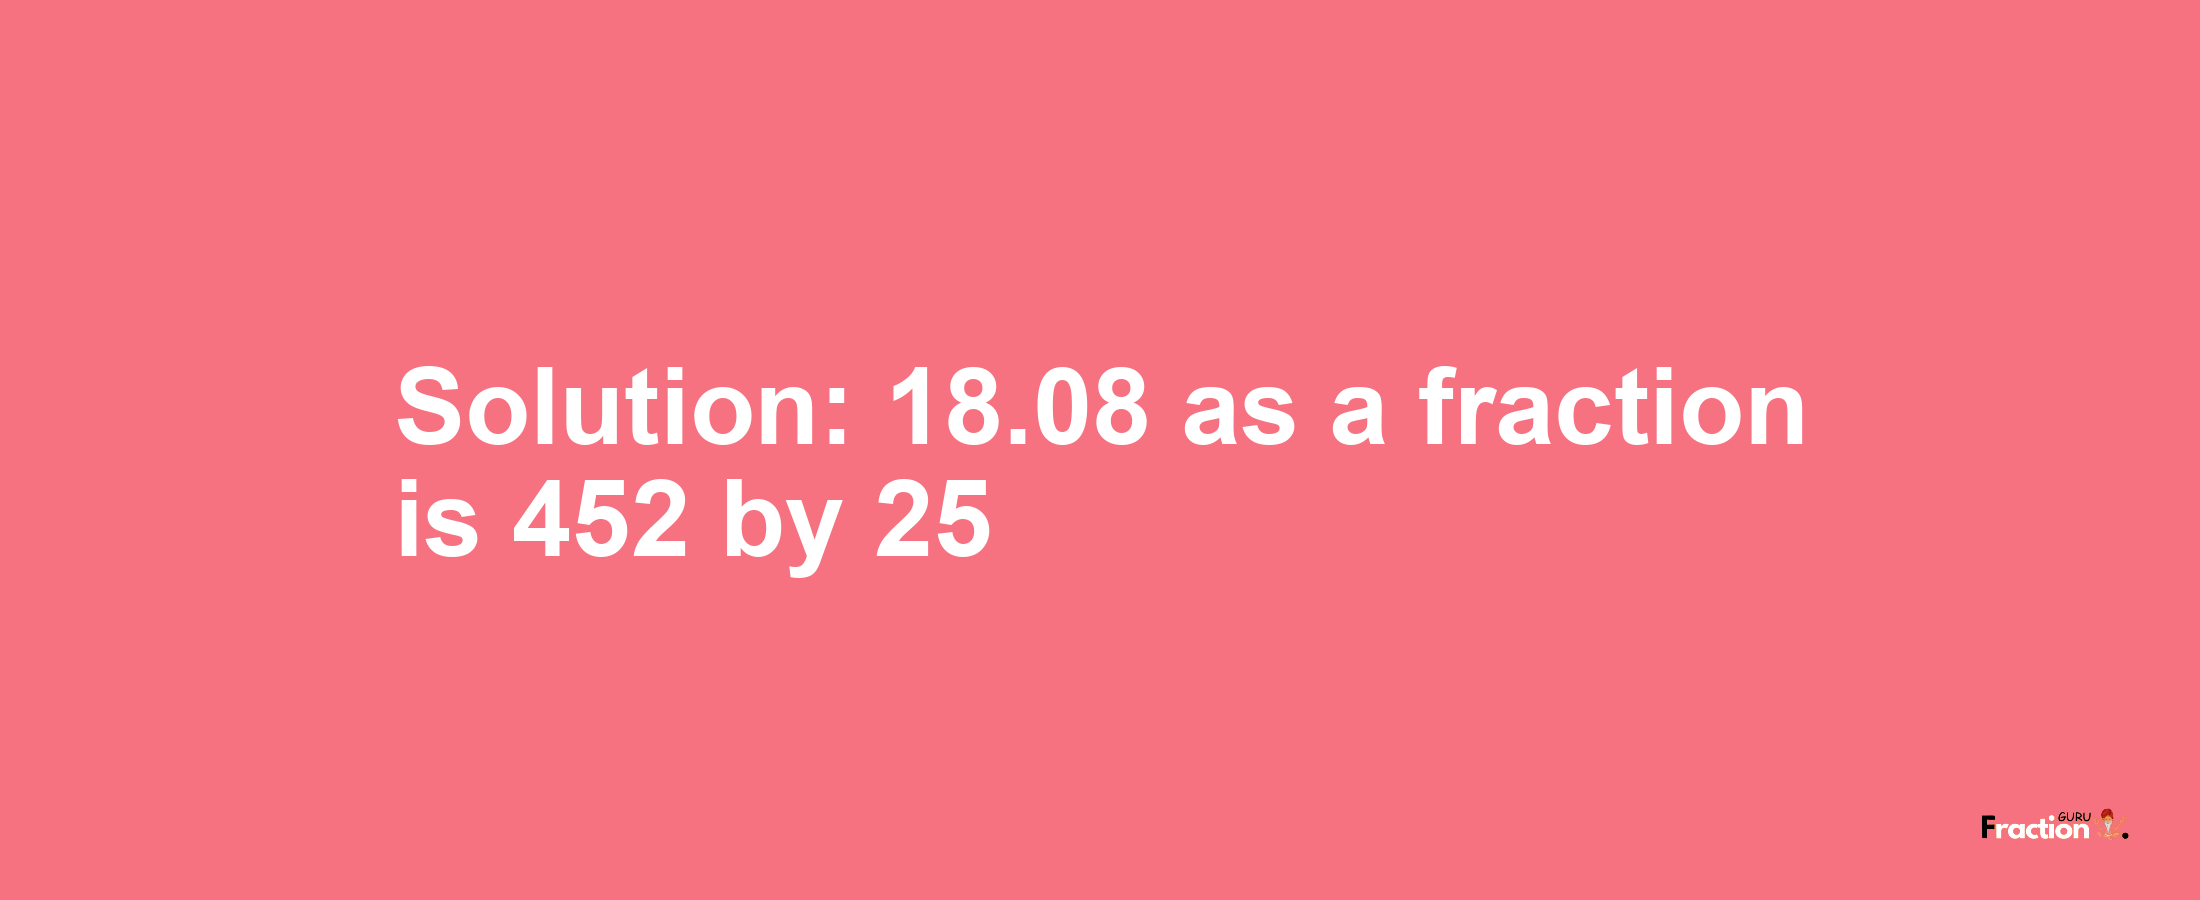 Solution:18.08 as a fraction is 452/25